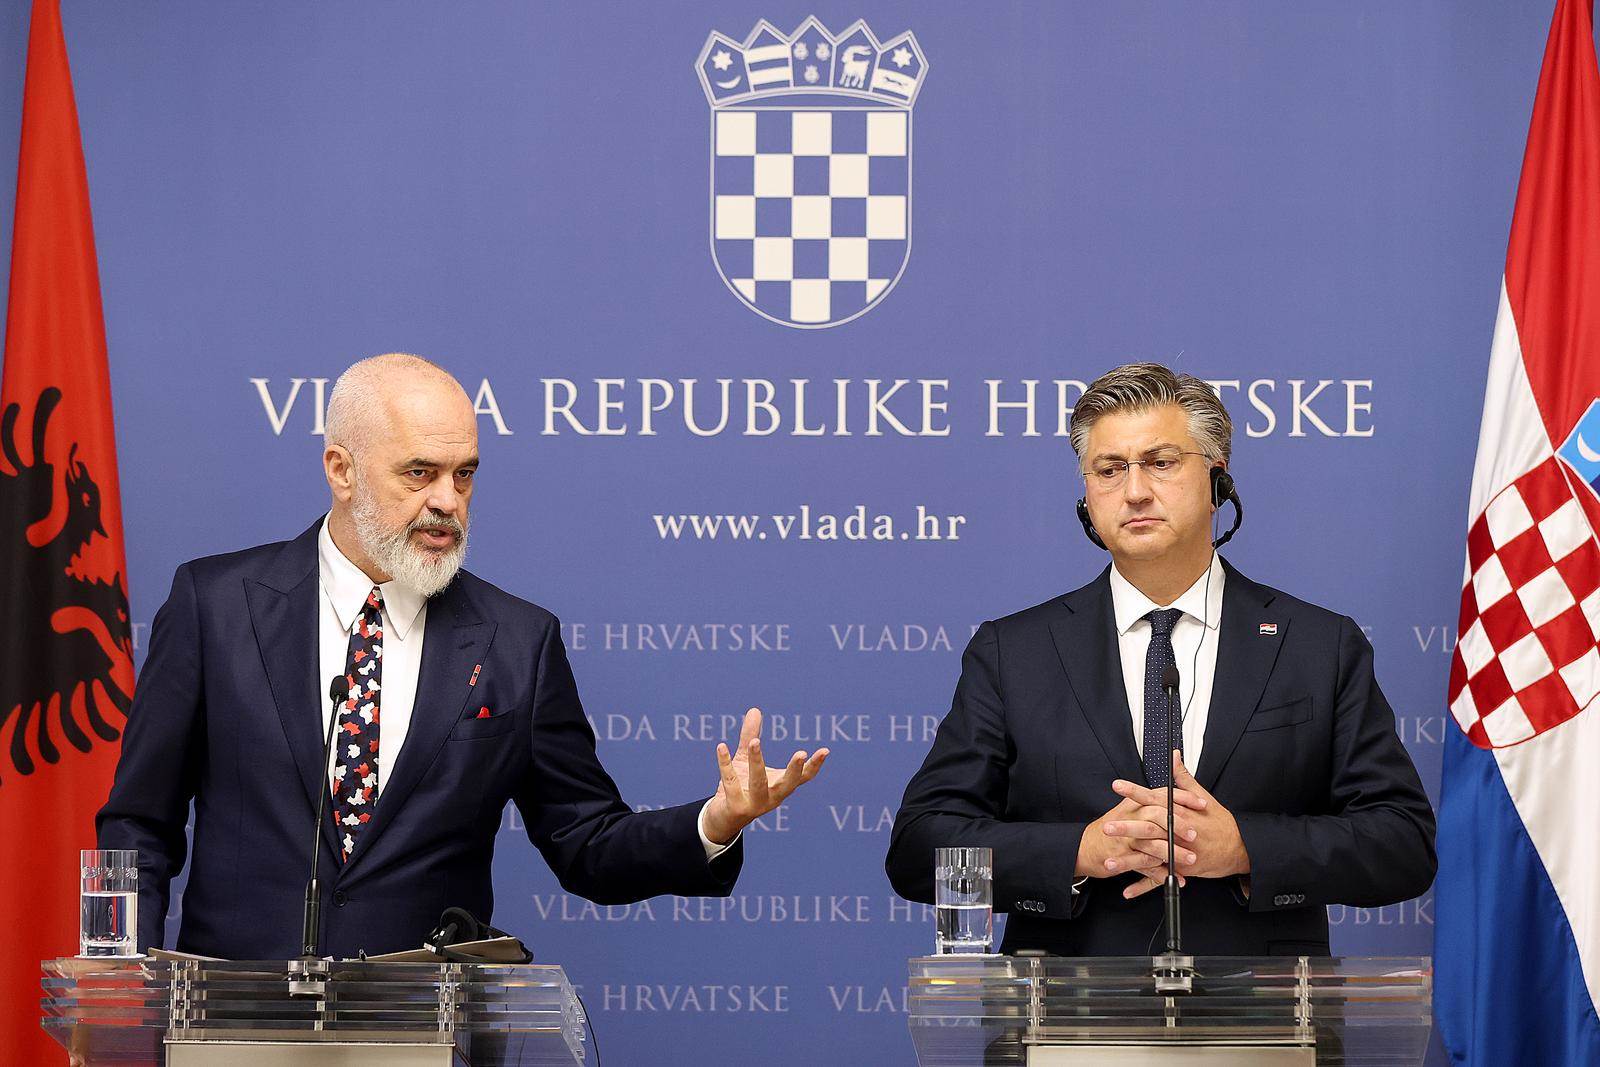 Prime ministers of Croatia and Albania meet in Zagreb to discuss situation in region